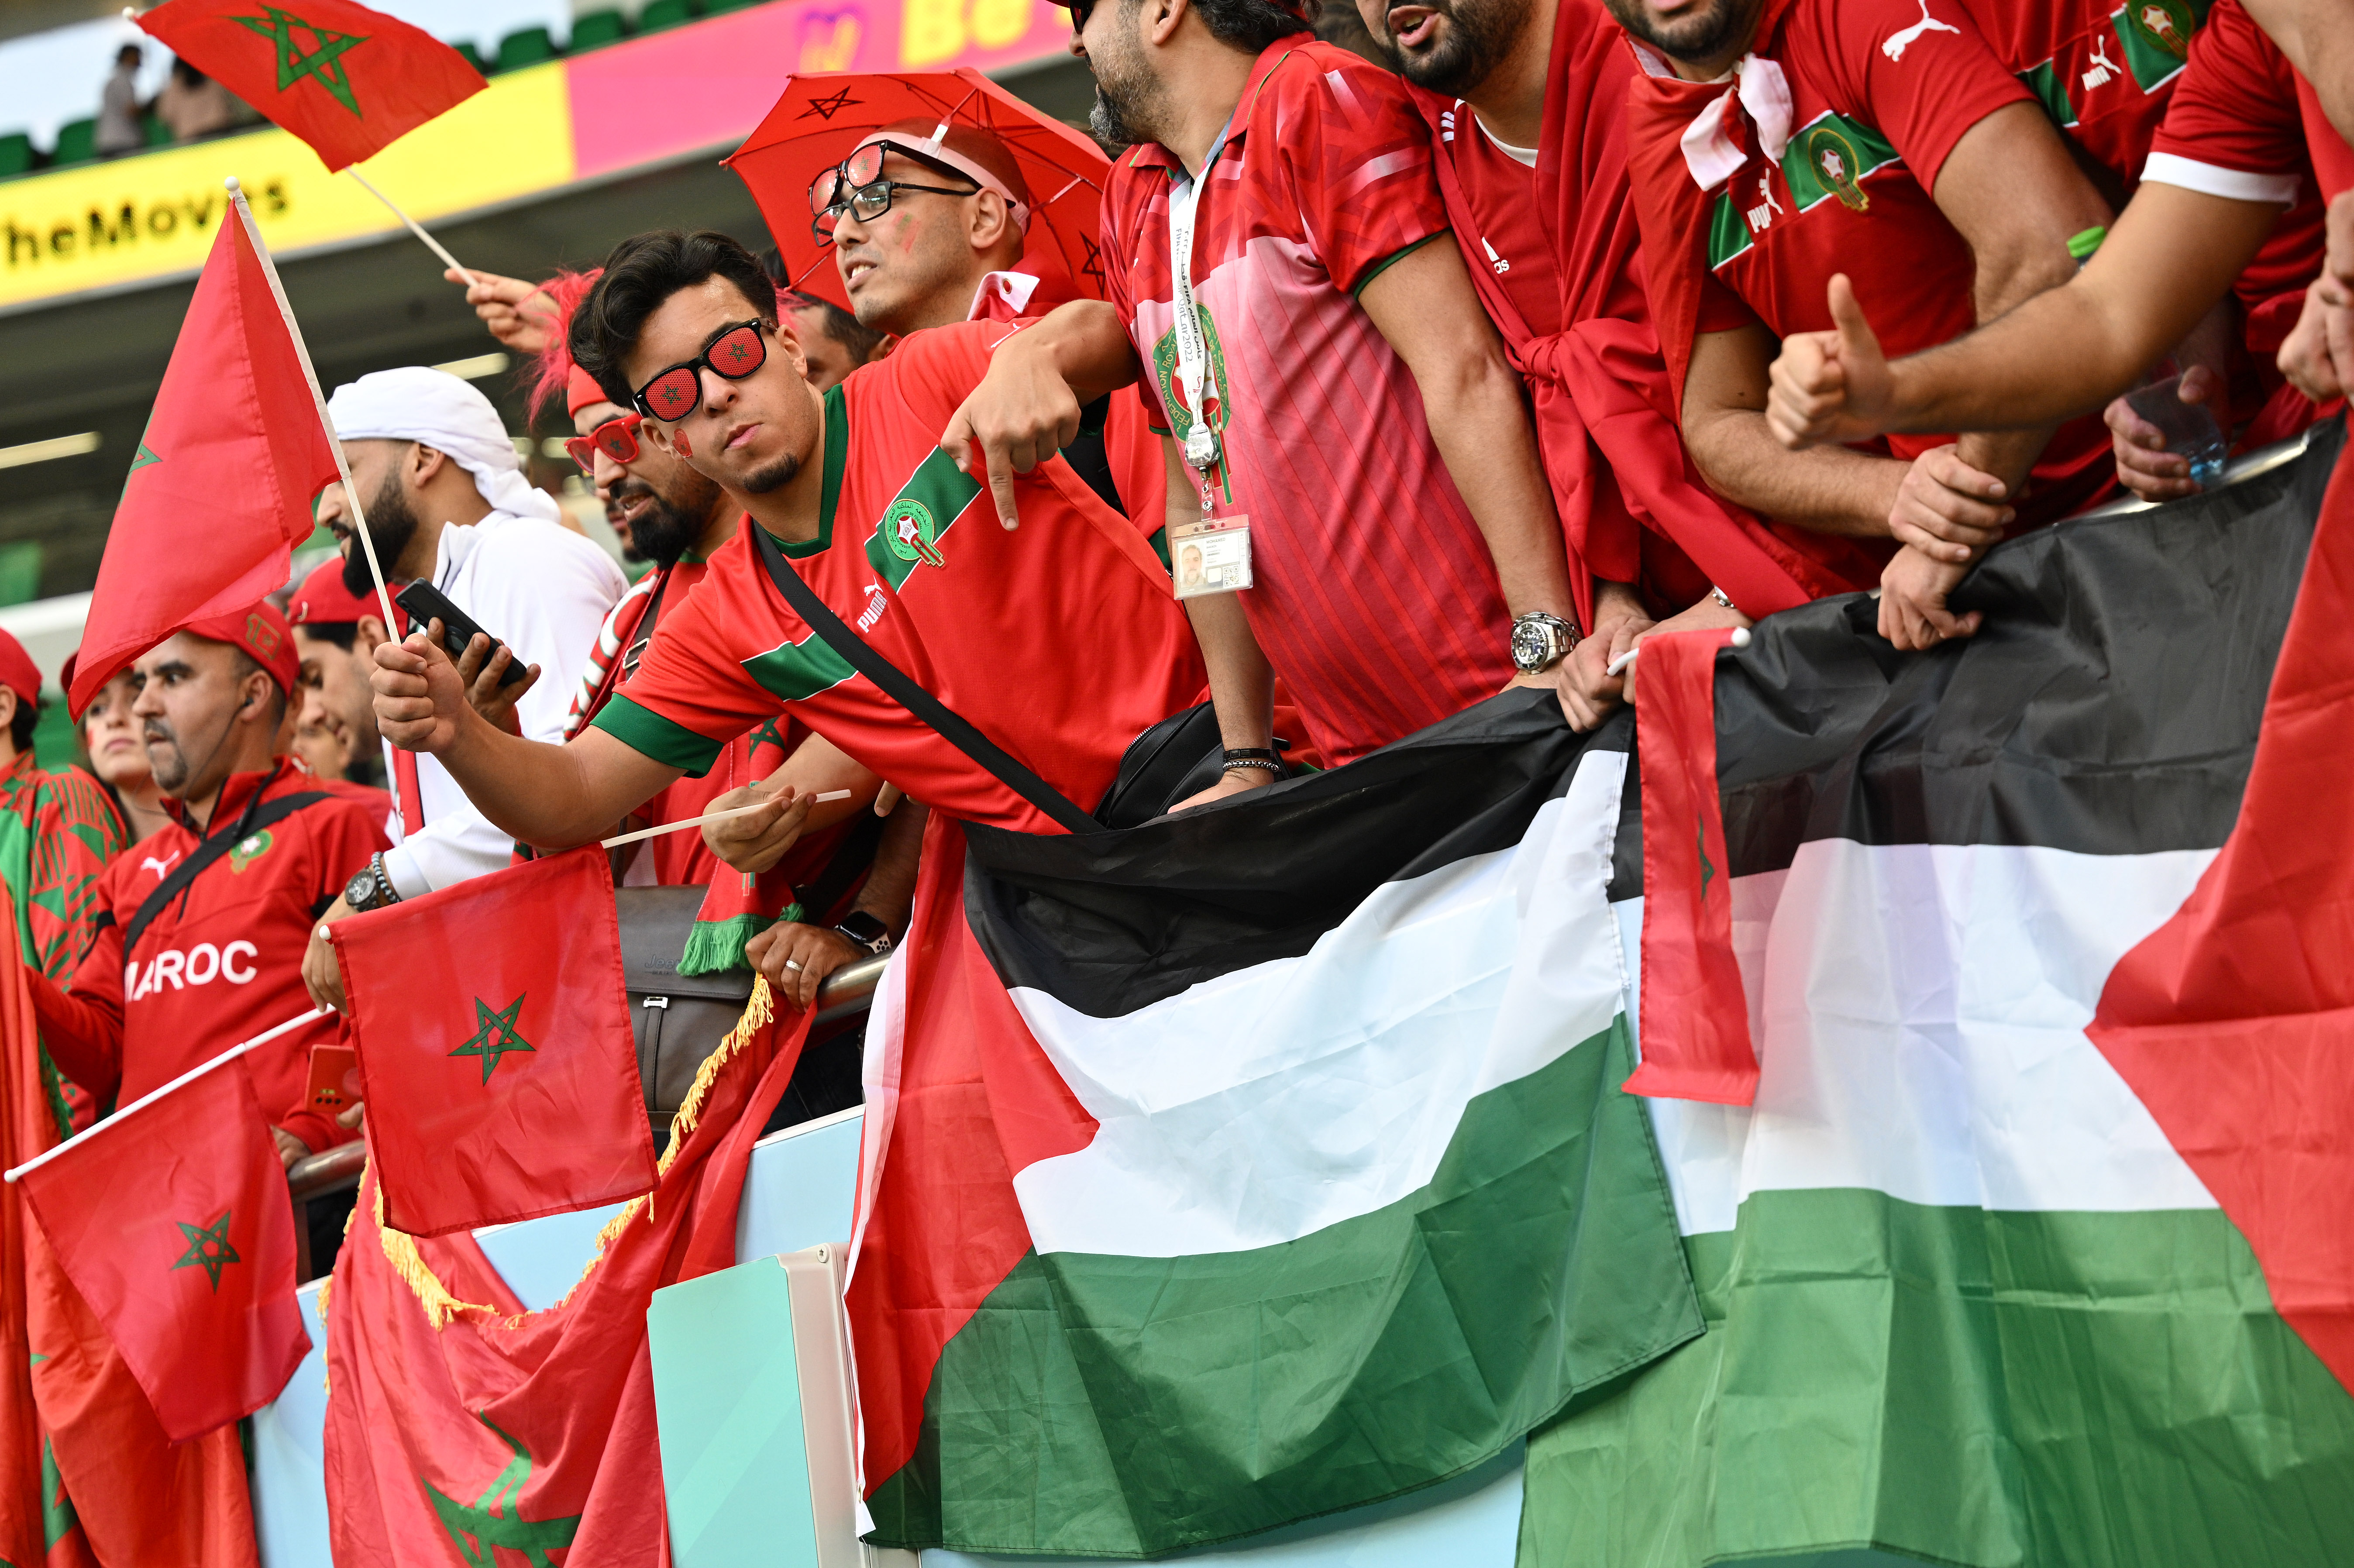 From Unity Intifada to World Cup, Palestine solidarity grows